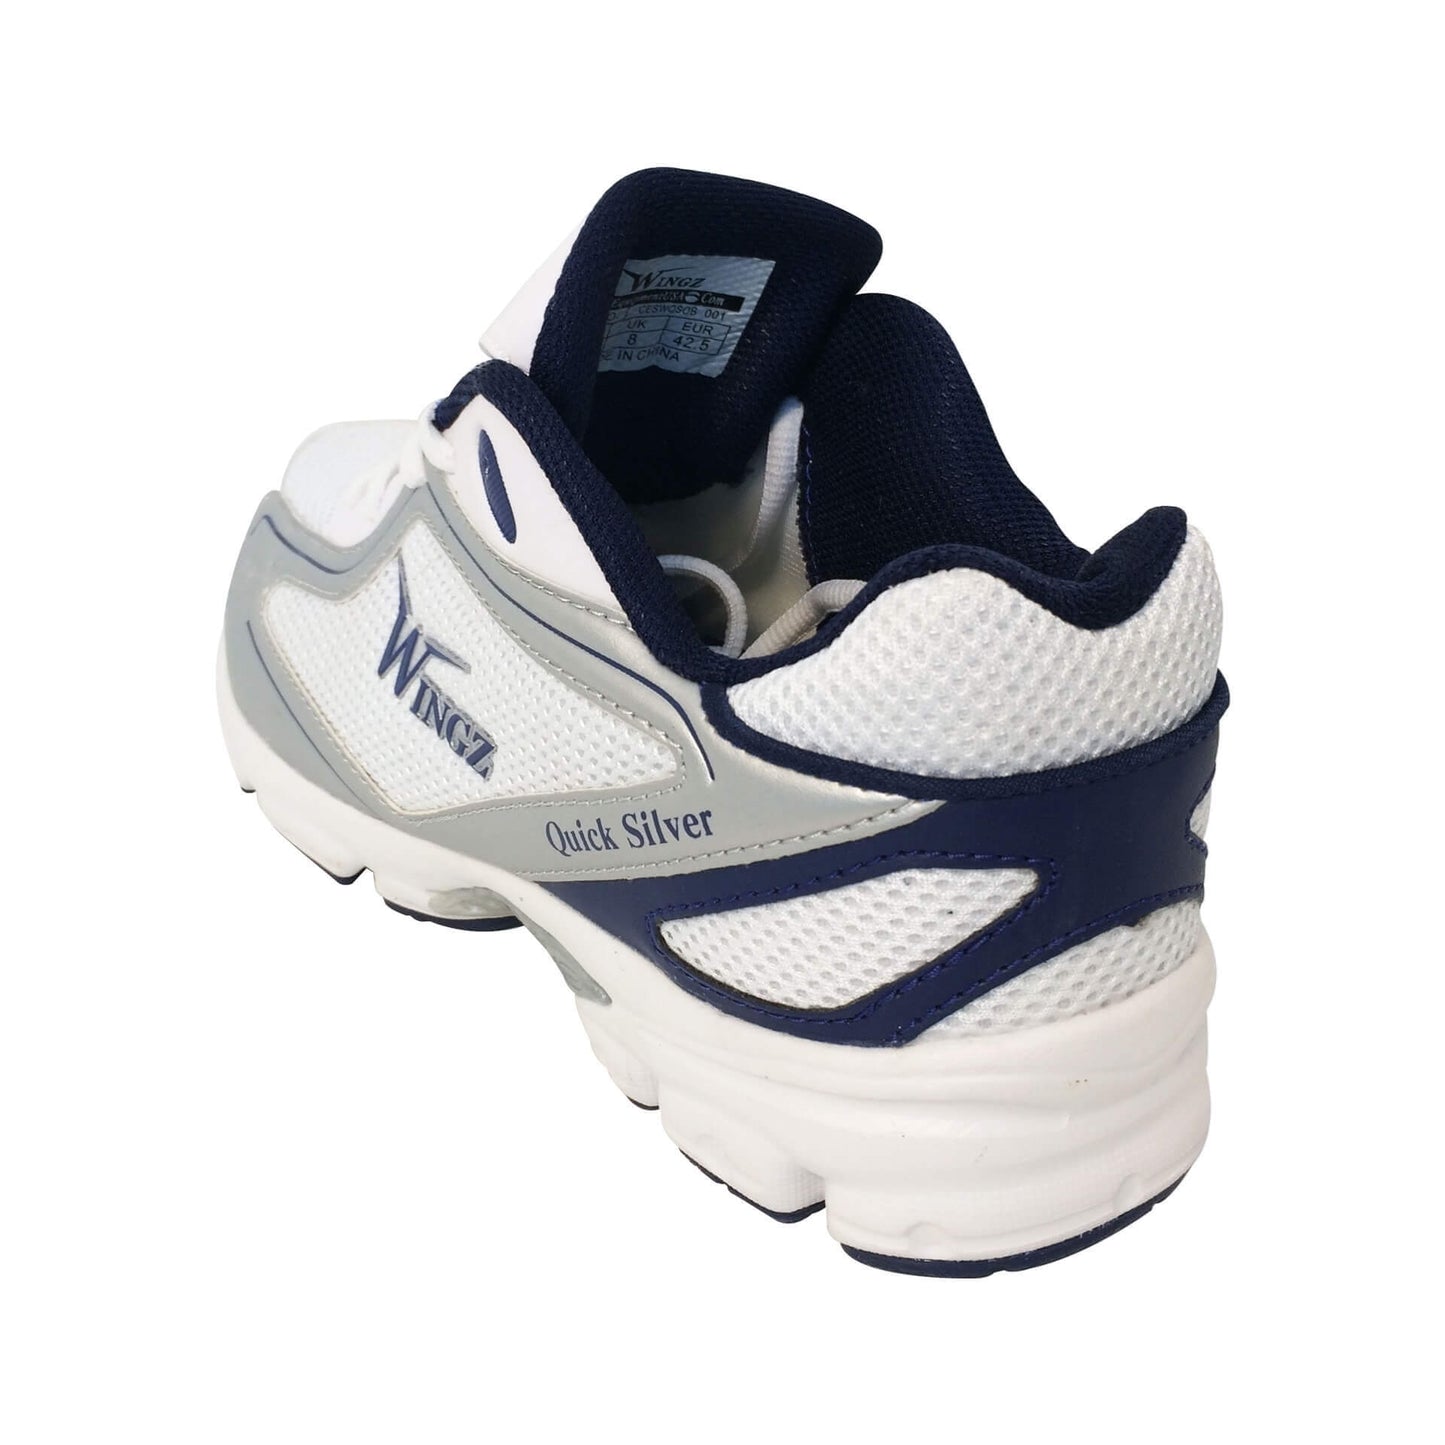 Wingz Quick Silver Rubber Sole Cricket Sports Shoes Color Royal Blue Silver